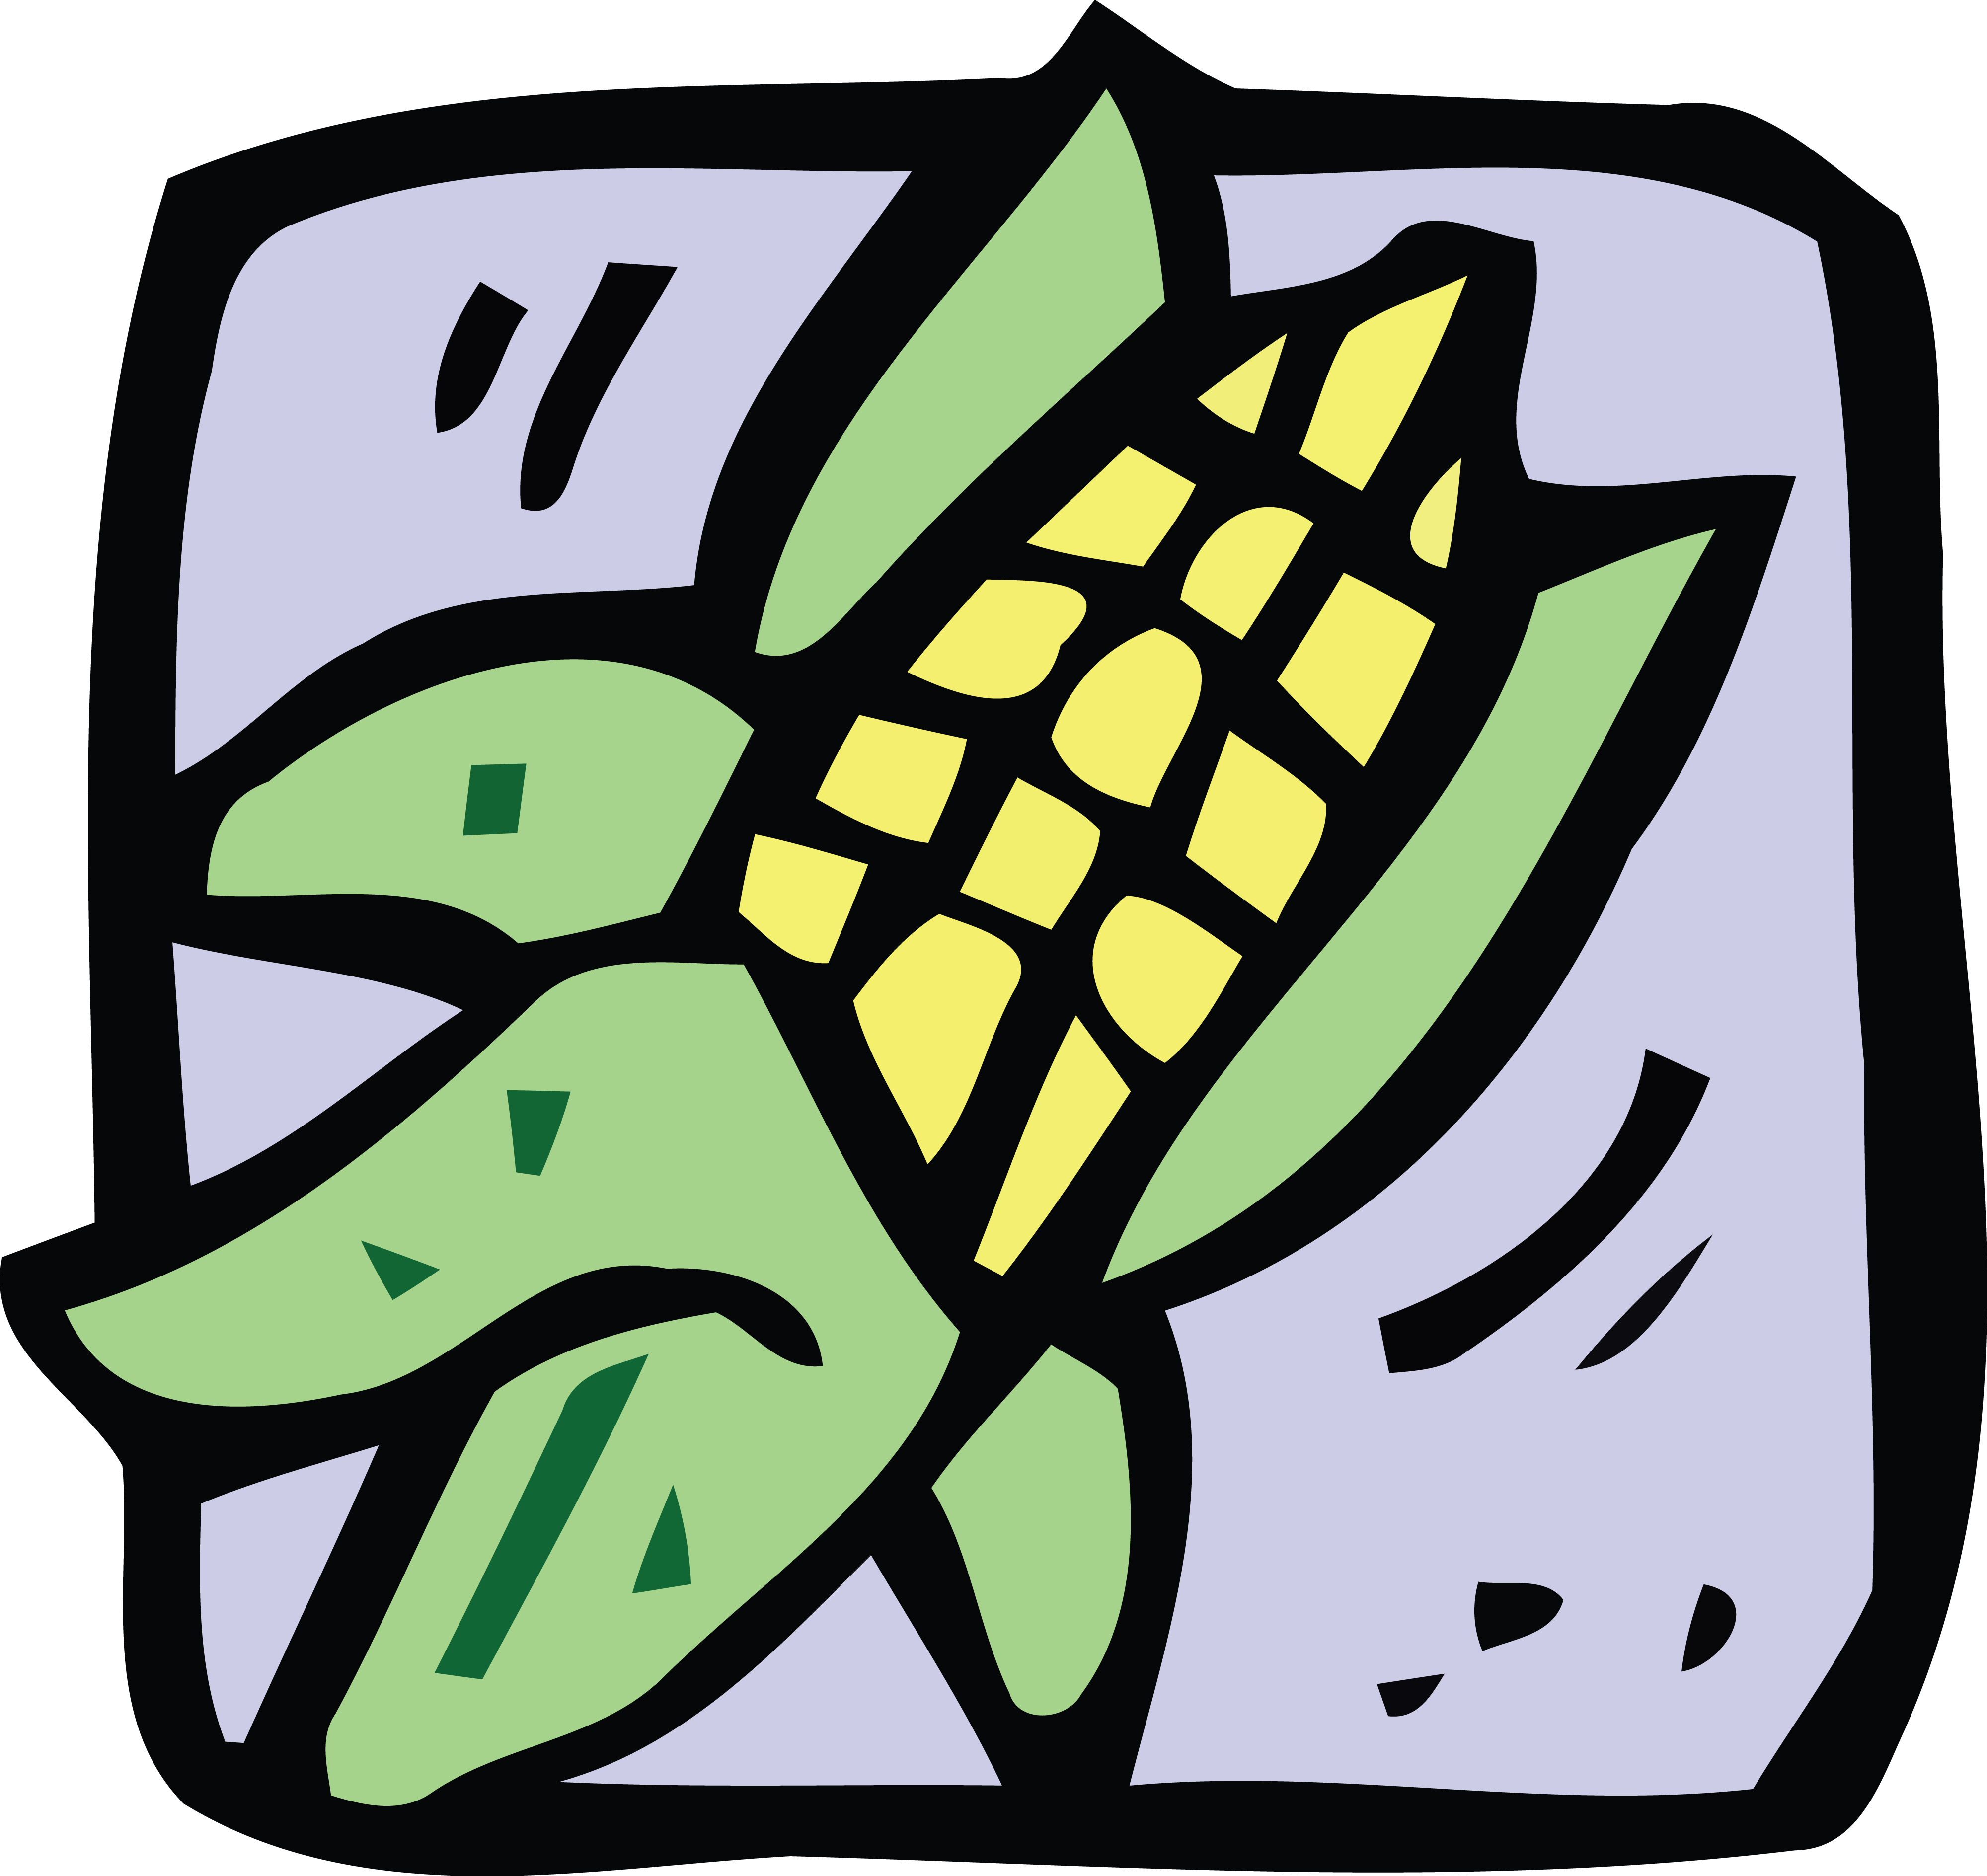 Free Clipart Of A Corn Ear - My Calorie Counting Journal: Calorie Counting Tracker (4000x3777)